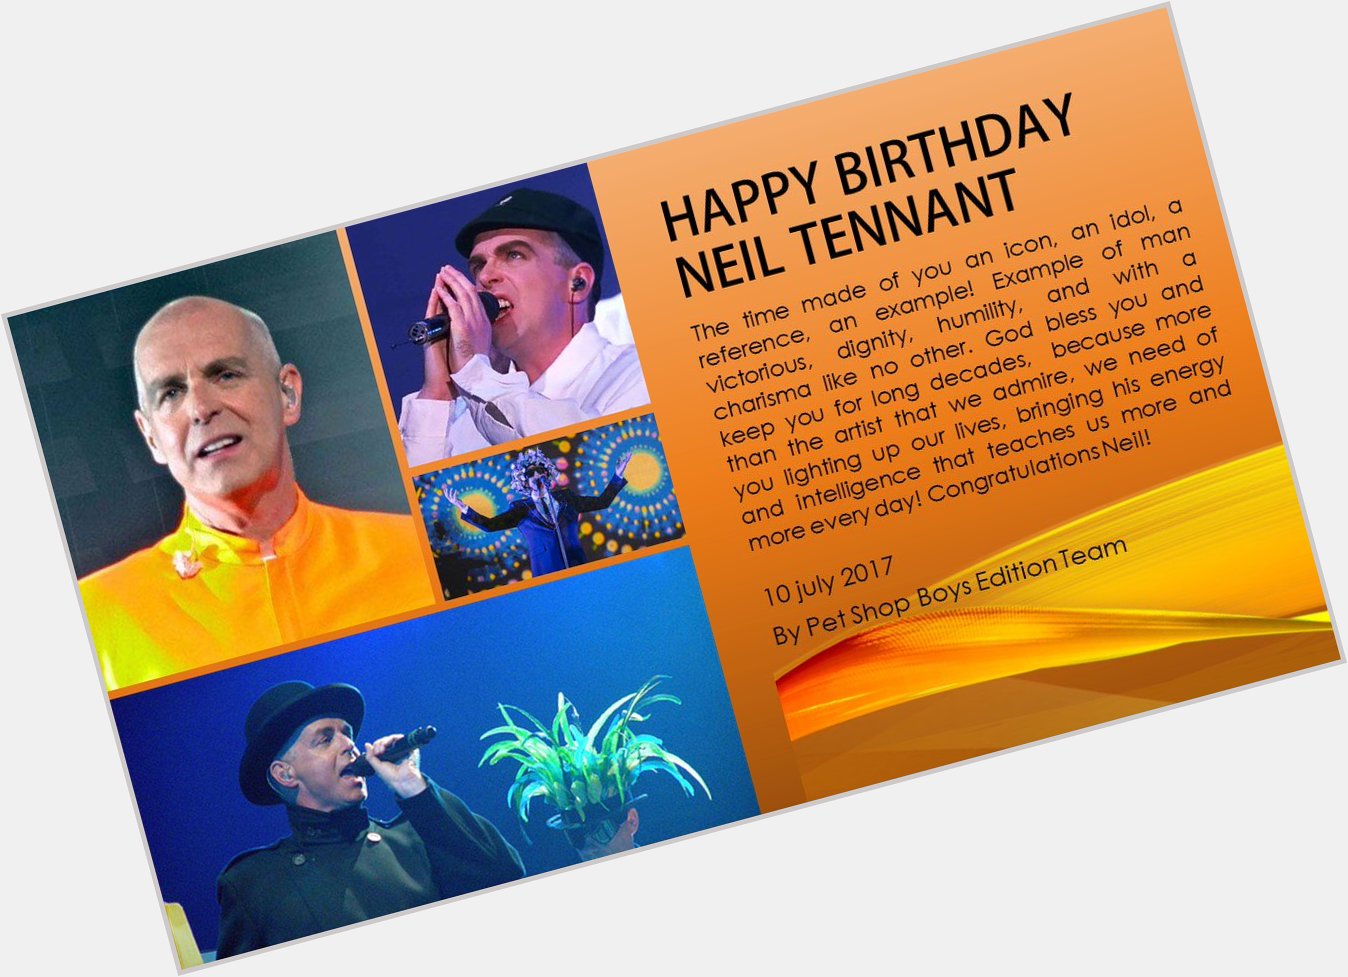  Happy Birthday for our Master Neil Tennant!!! 